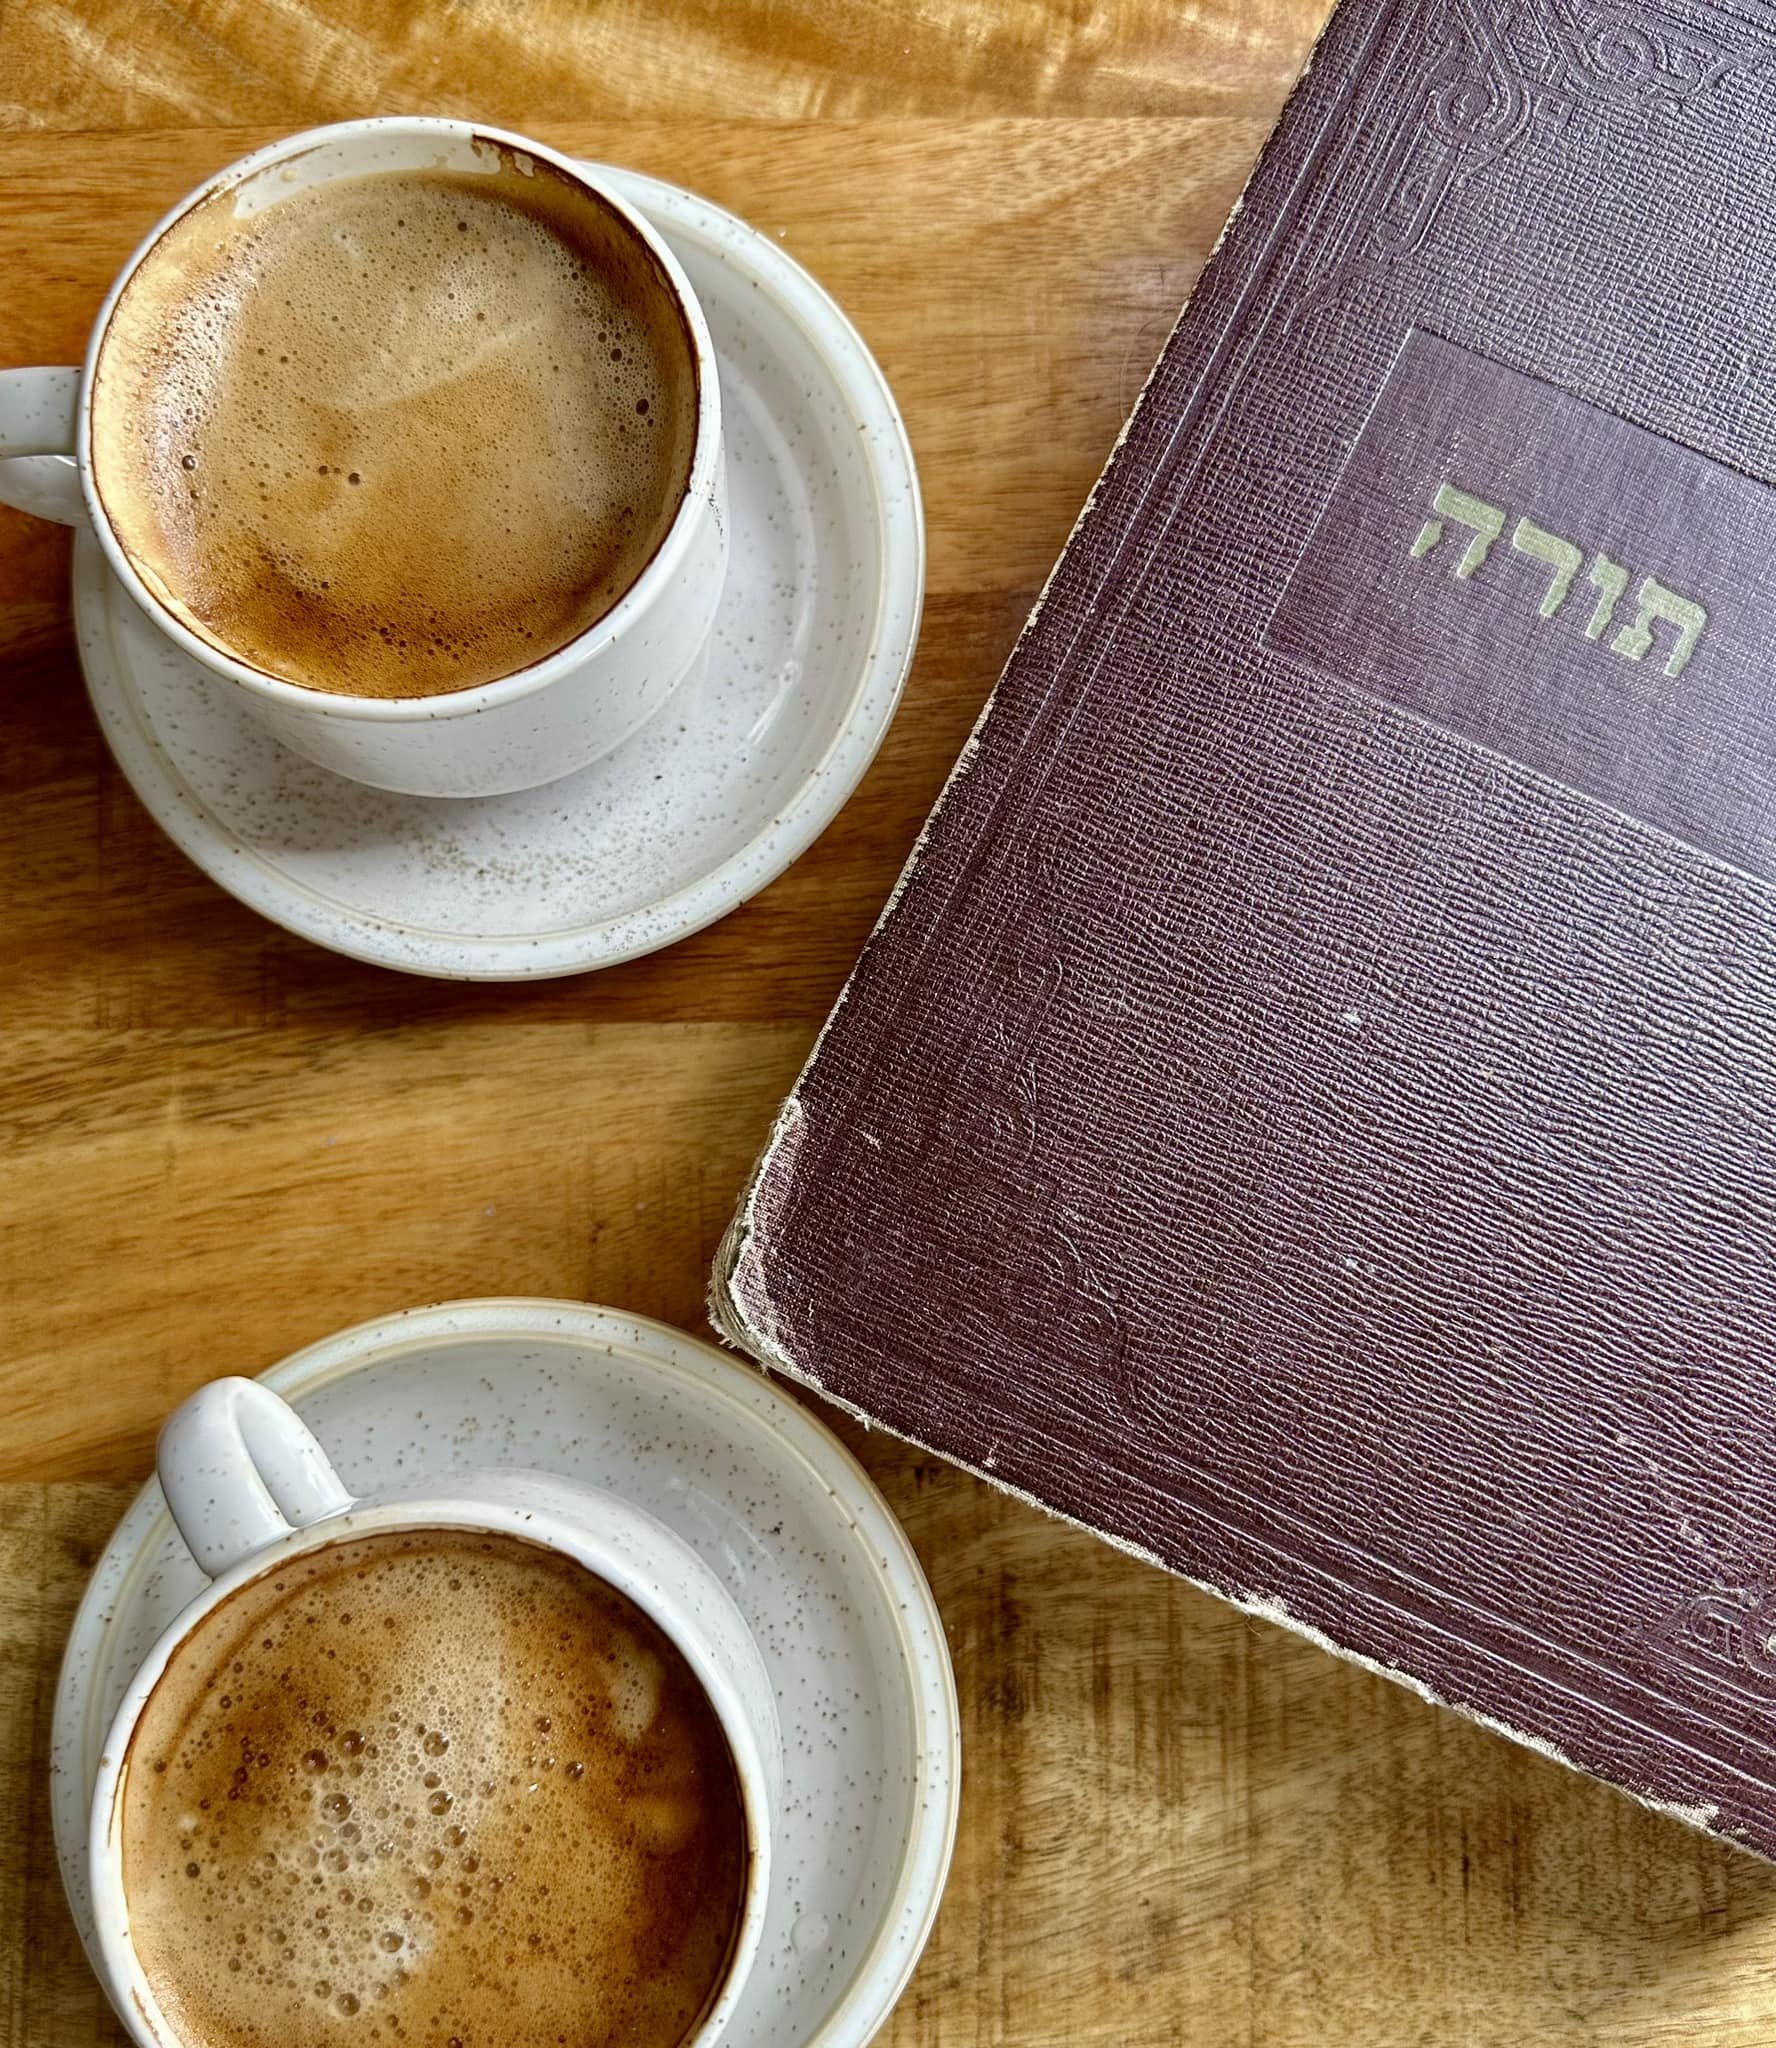 This picture was captured this morning while drinking my morning coffee and studying some Chassidic thoughts.😄

As a Rabbi, dad, husband and a long lists of responsibilities that are too long to count, often it's hard to find time to sit down and st